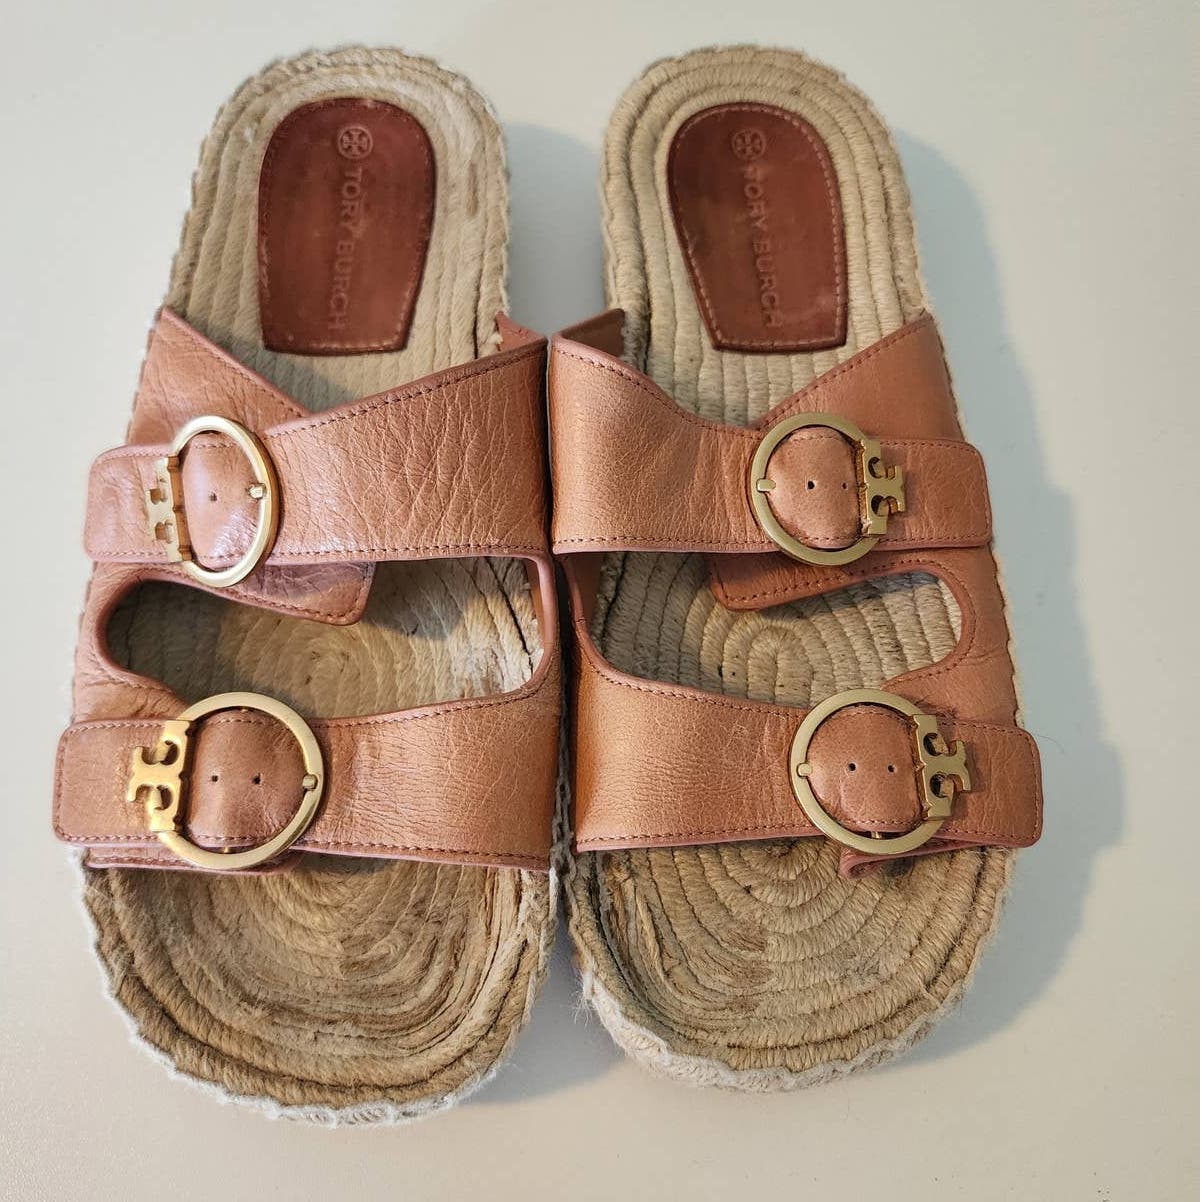 Tory Burch Selby Espadrille Sandals Leather Two Band Slip on size 7.5